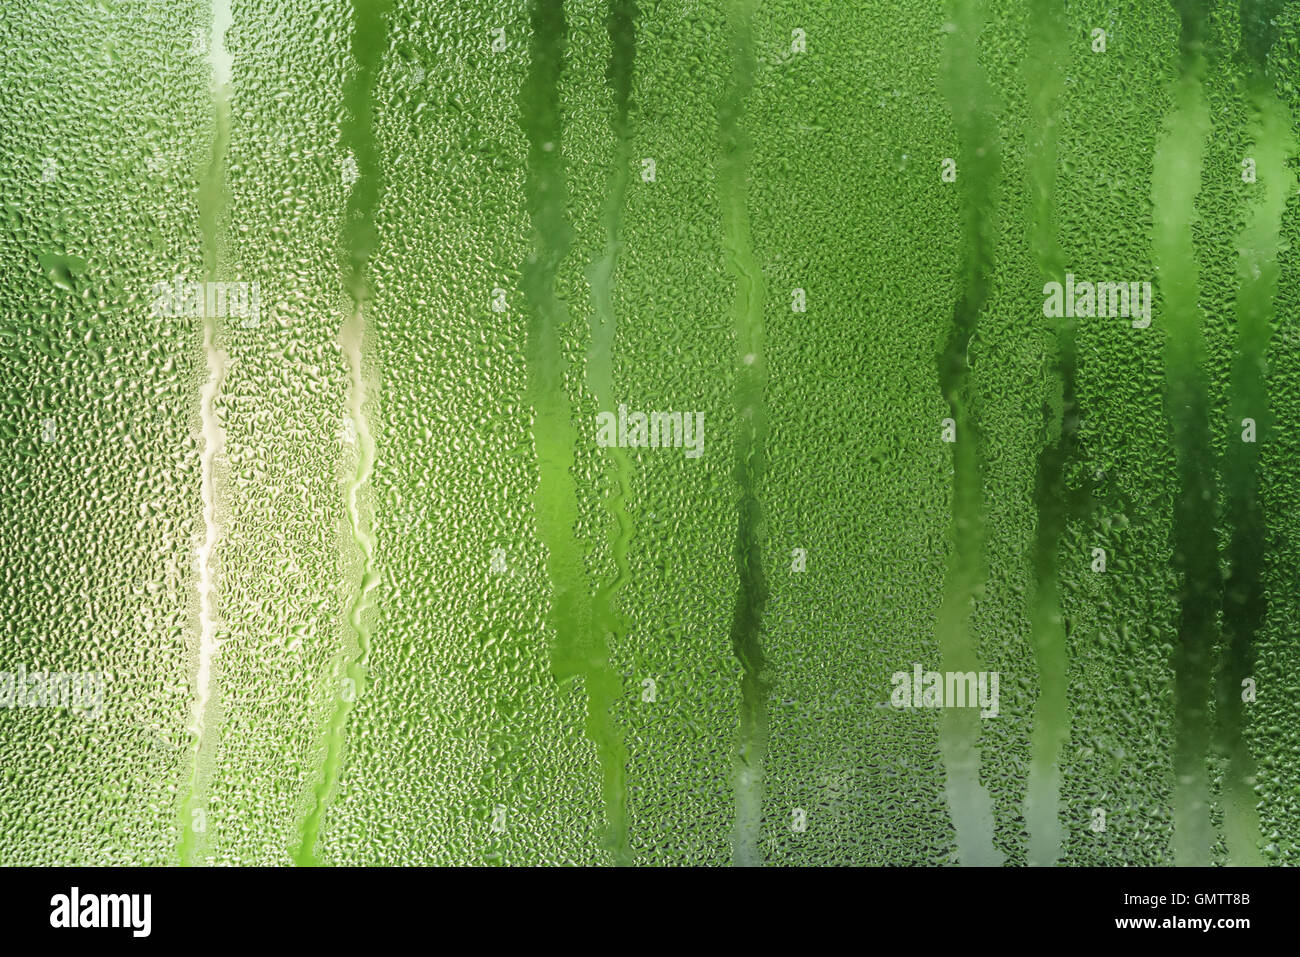 water condensate on window glass Stock Photo